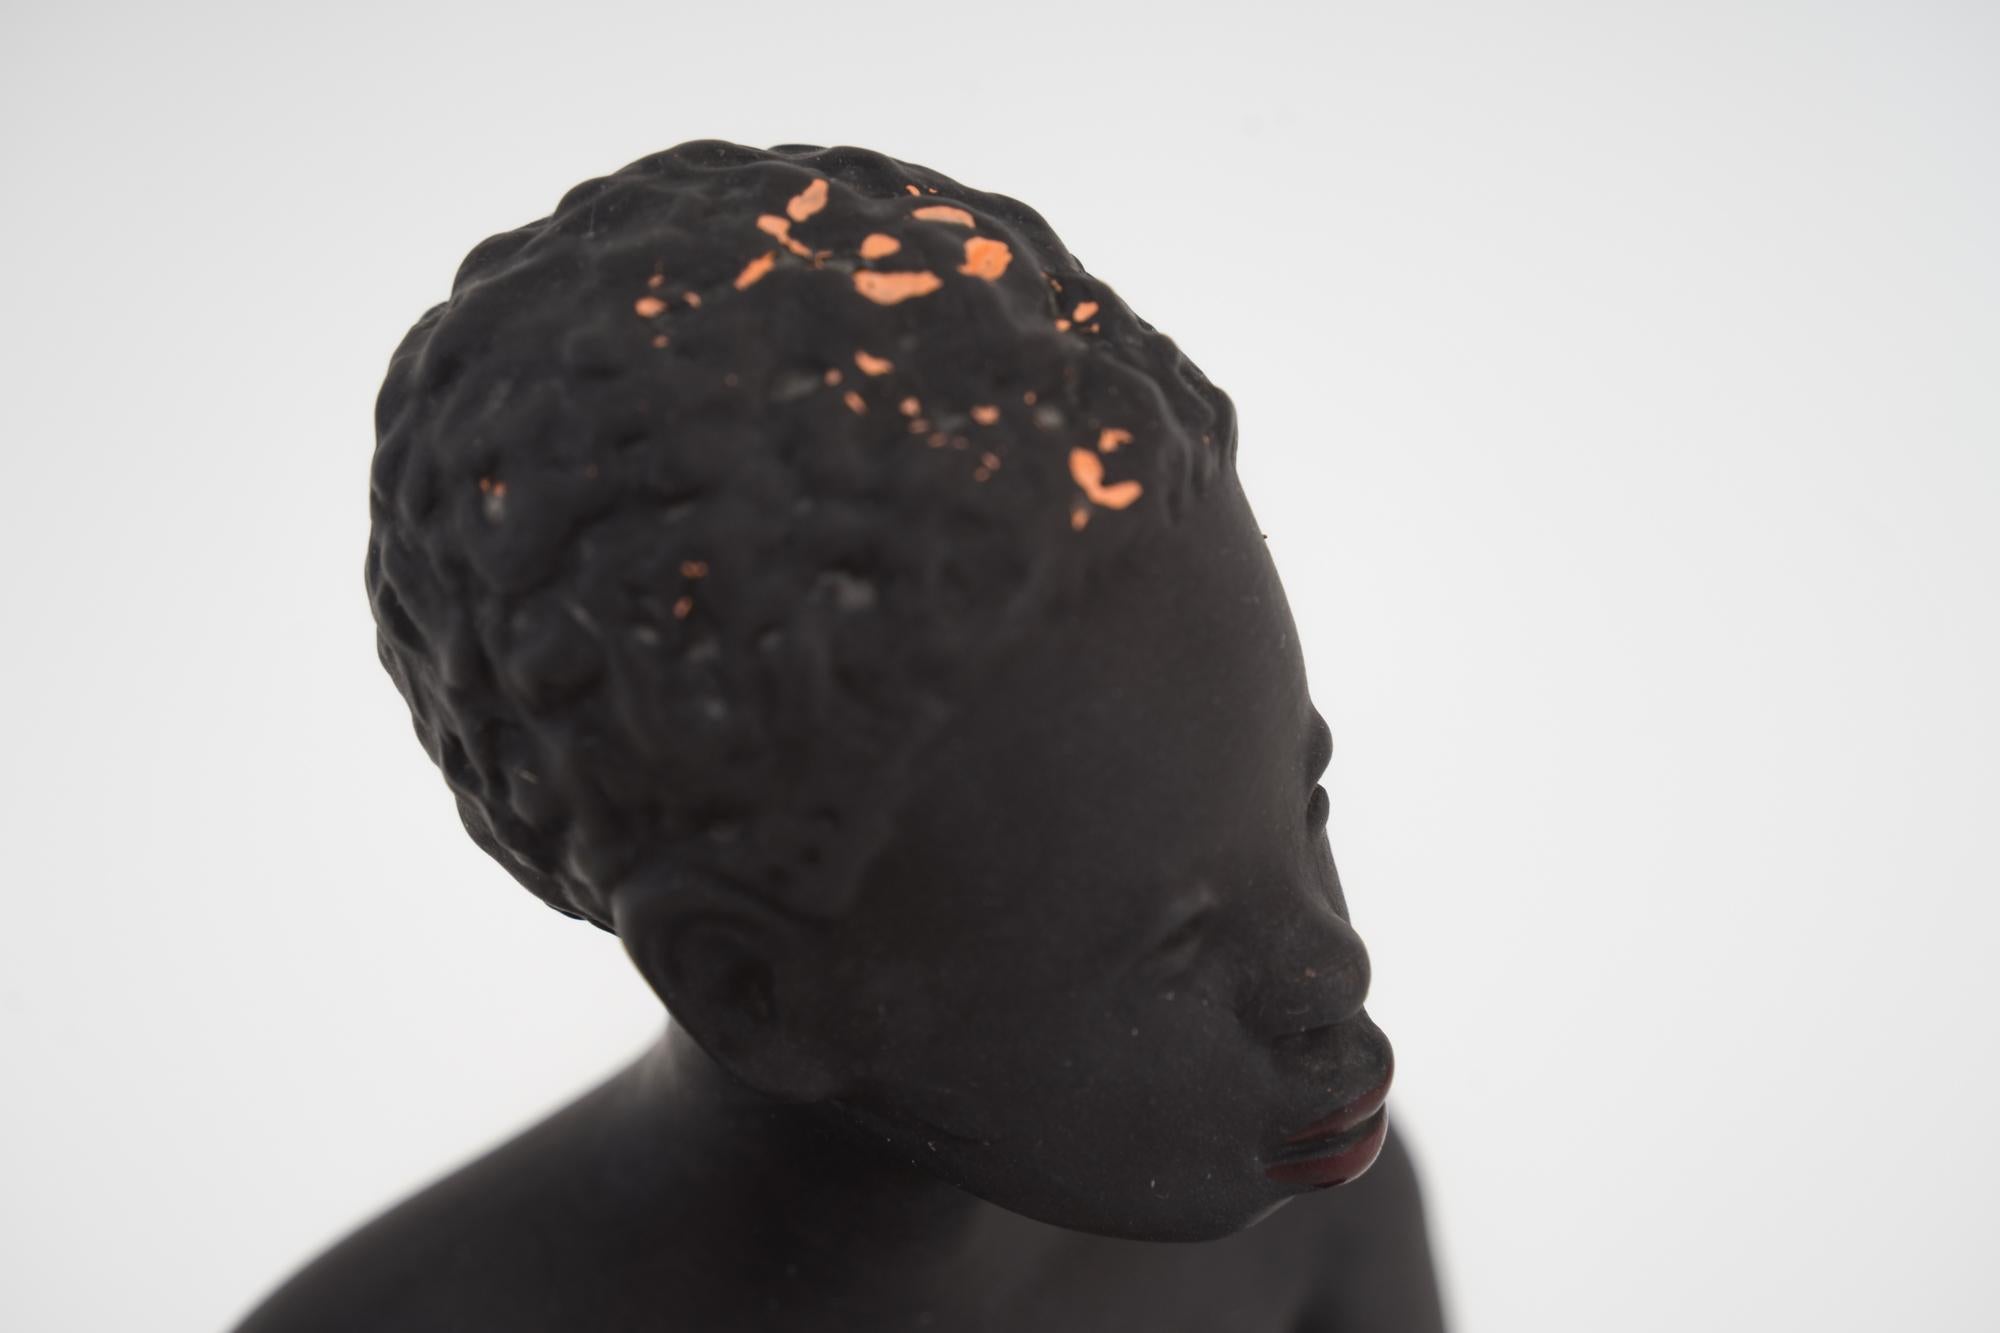 Exotic African women Sculpture by Leopold Anzengruber, Vienna 1950s
Unfortunately there is color wear on the head ( please take a look on the attached photos )
Original condition